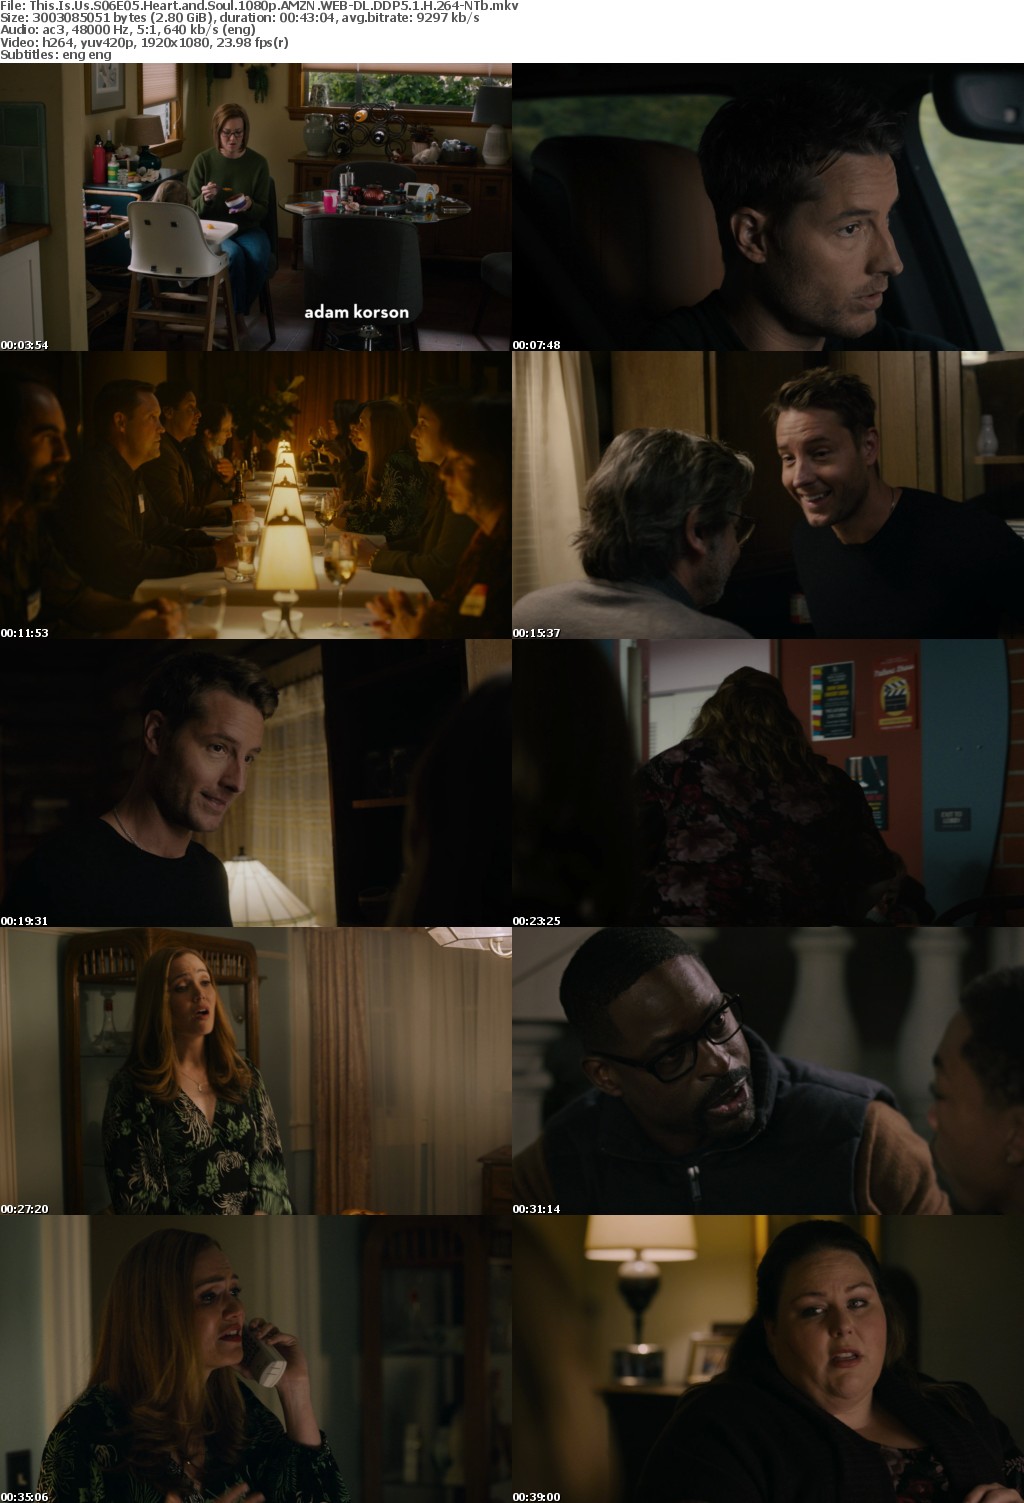 This is Us S06E05 Heart and Soul 1080p AMZN WEBRip DDP5 1 x264-NTb